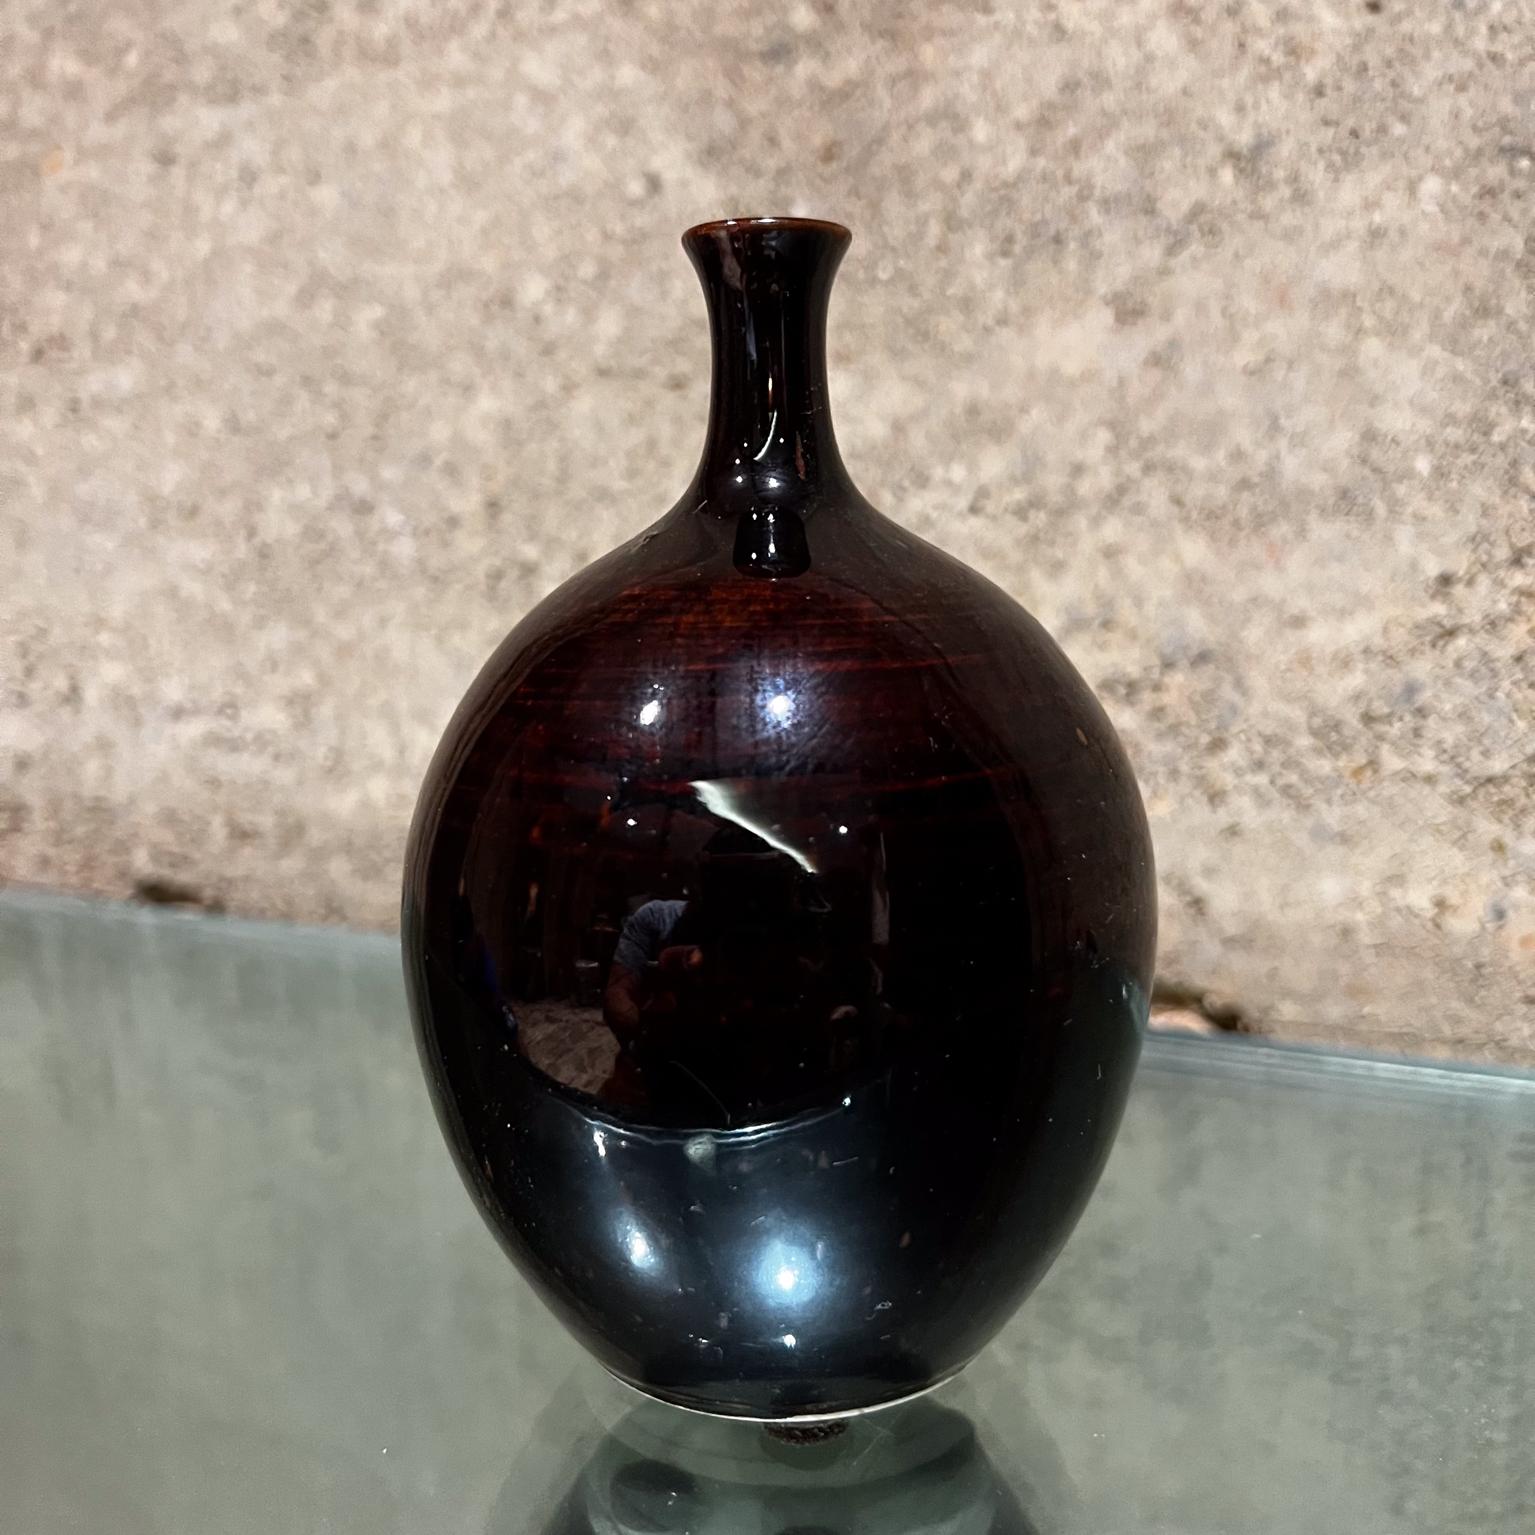 Vintage Studio Art Pottery Modern Glossy Dark Weed Pot Vase
Earle Freeman 10/75 signed
5.25 h x 3.5 diameter
Preowned vintage condition
Review images provided please.